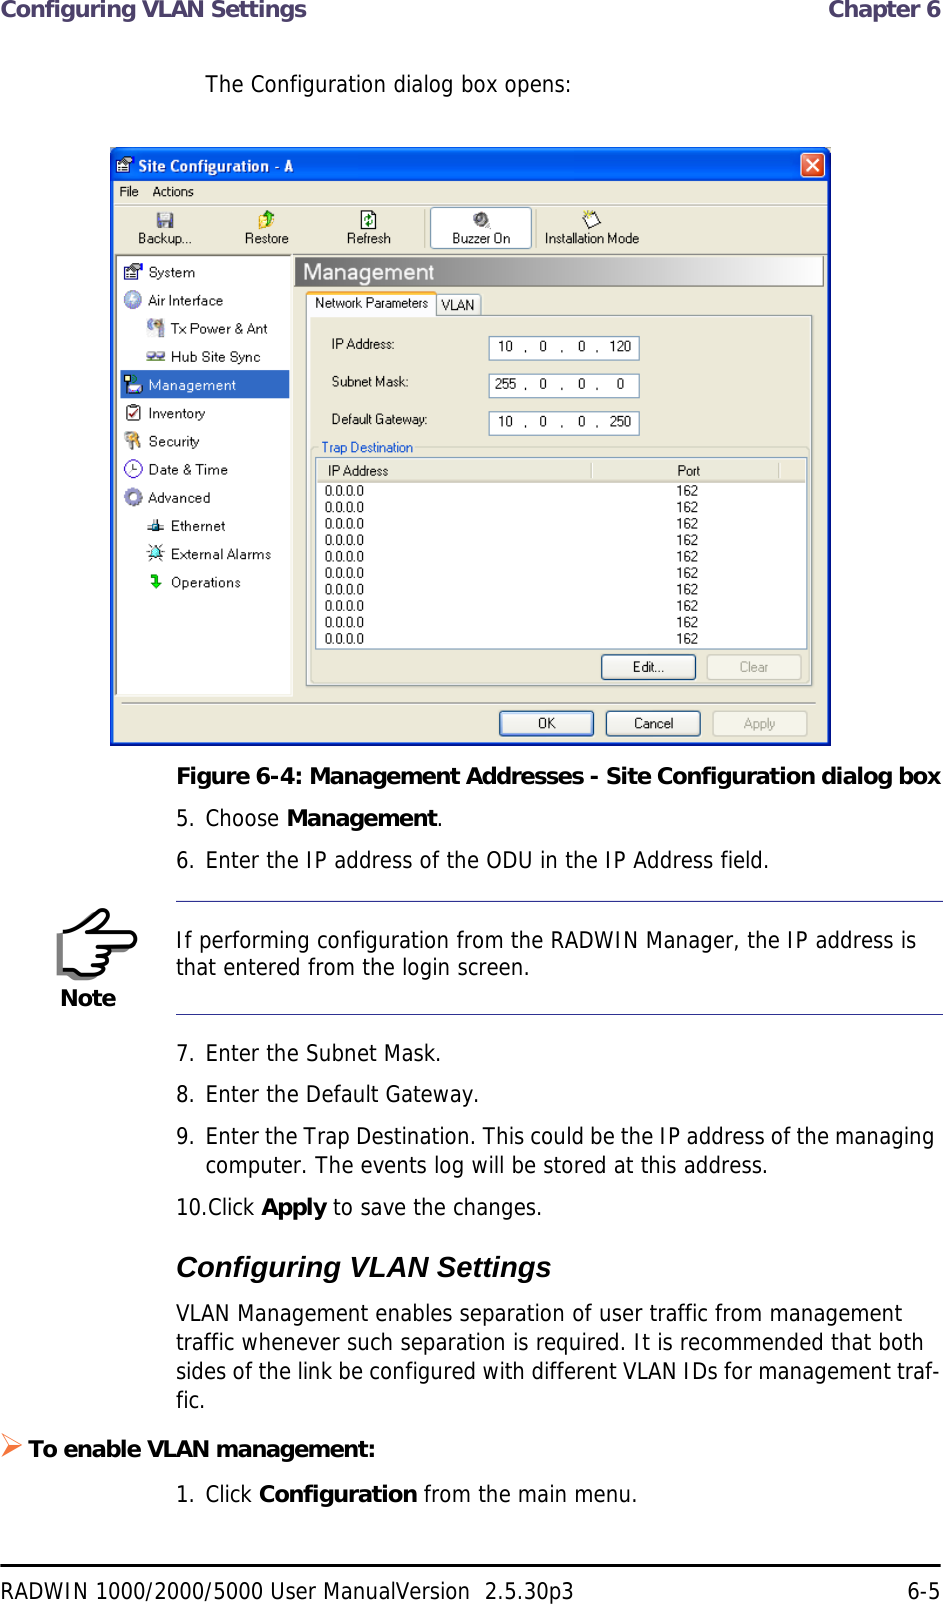 Configuring VLAN Settings  Chapter 6RADWIN 1000/2000/5000 User ManualVersion  2.5.30p3 6-5The Configuration dialog box opens:Figure 6-4: Management Addresses - Site Configuration dialog box5. Choose Management.6. Enter the IP address of the ODU in the IP Address field.7. Enter the Subnet Mask.8. Enter the Default Gateway.9. Enter the Trap Destination. This could be the IP address of the managing computer. The events log will be stored at this address.10.Click Apply to save the changes.Configuring VLAN SettingsVLAN Management enables separation of user traffic from management traffic whenever such separation is required. It is recommended that both sides of the link be configured with different VLAN IDs for management traf-fic.To enable VLAN management:1. Click Configuration from the main menu.NoteIf performing configuration from the RADWIN Manager, the IP address is that entered from the login screen.